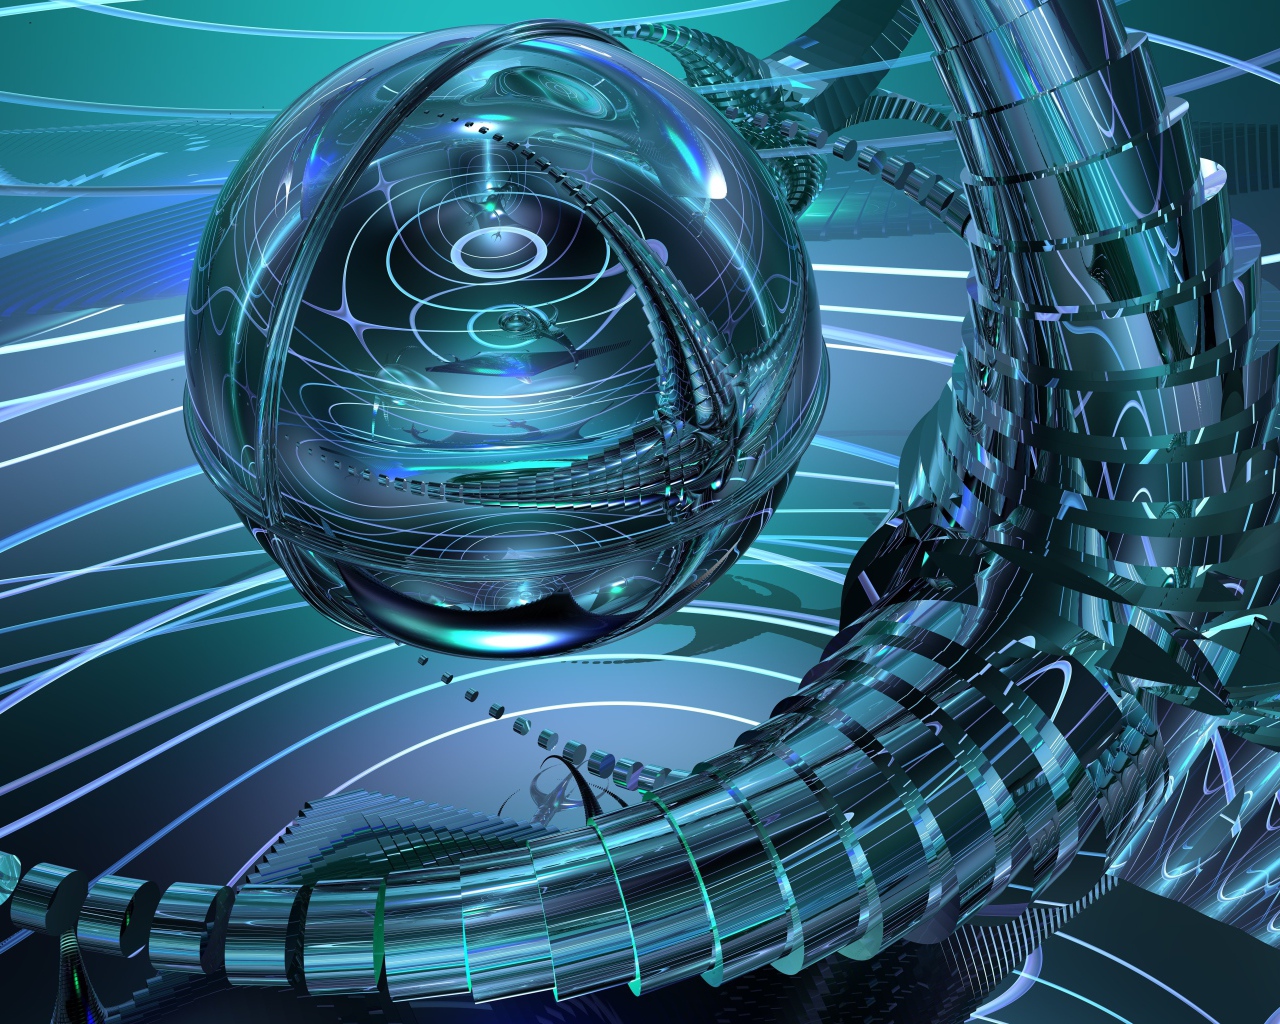 Sphere with metal tentacles, 3D graphics